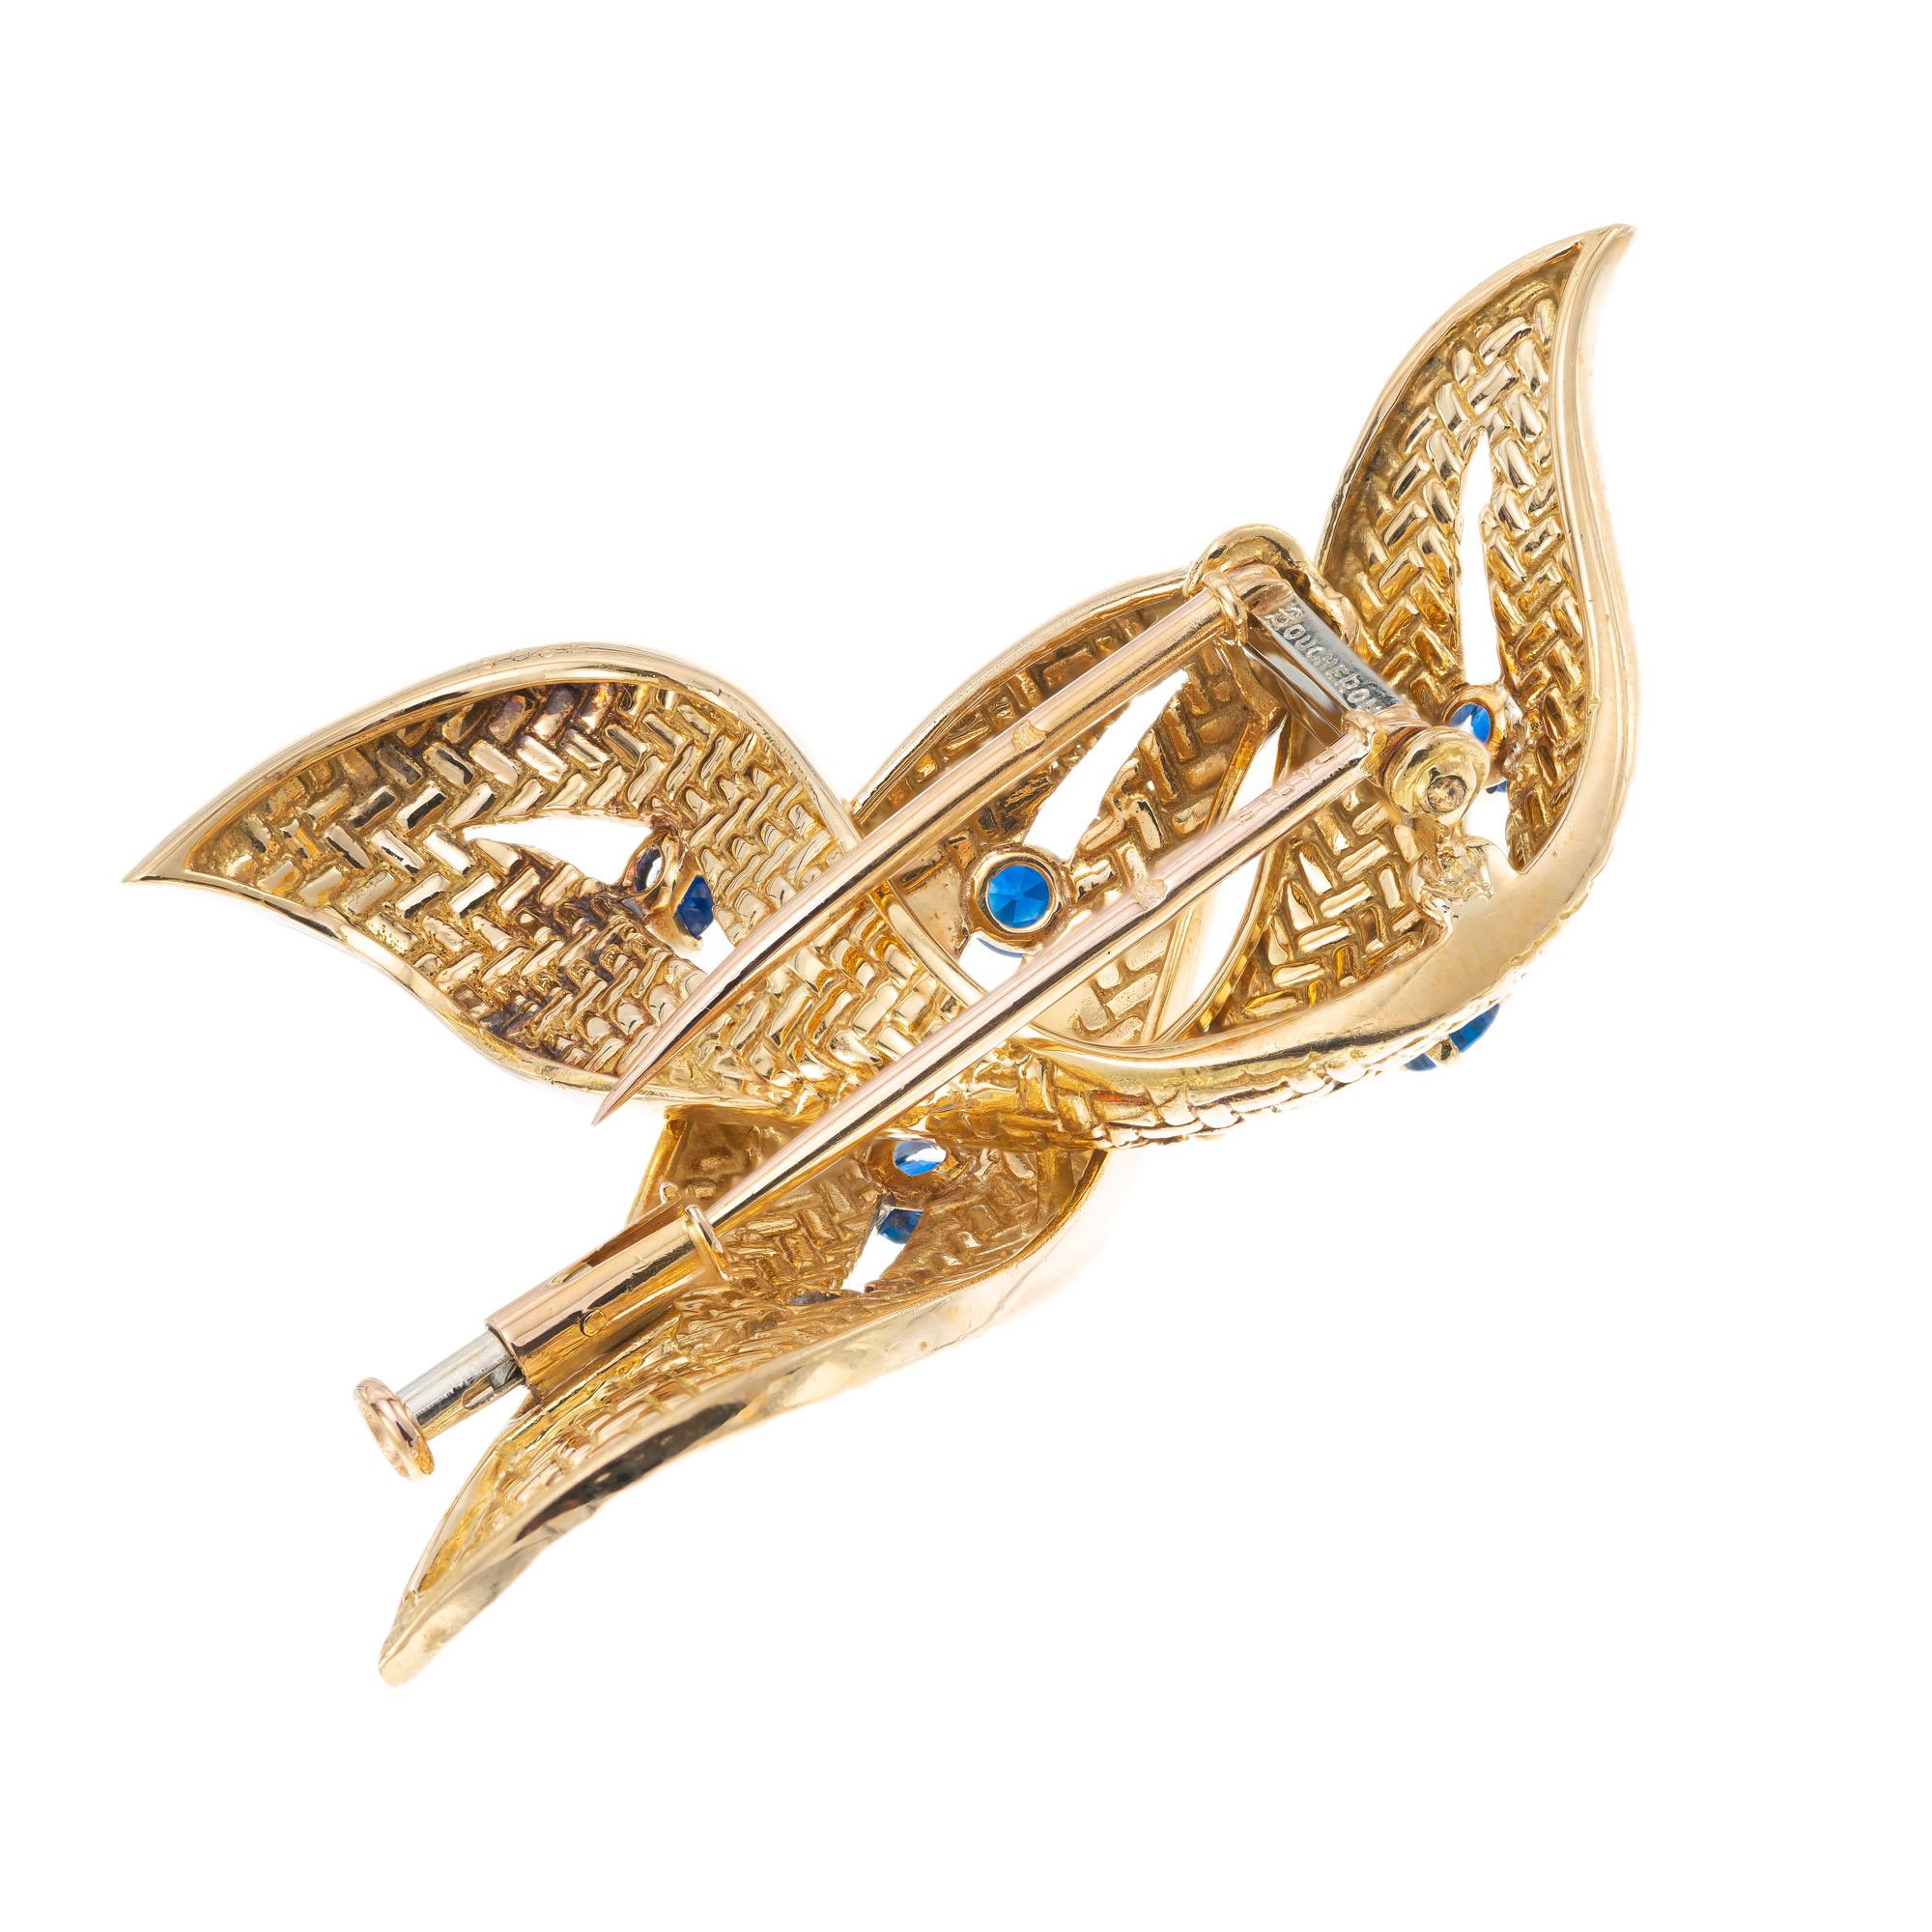 Boucheron Paris .70 Carat Sapphire Yellow Gold Swirl Brooch In Good Condition For Sale In Stamford, CT